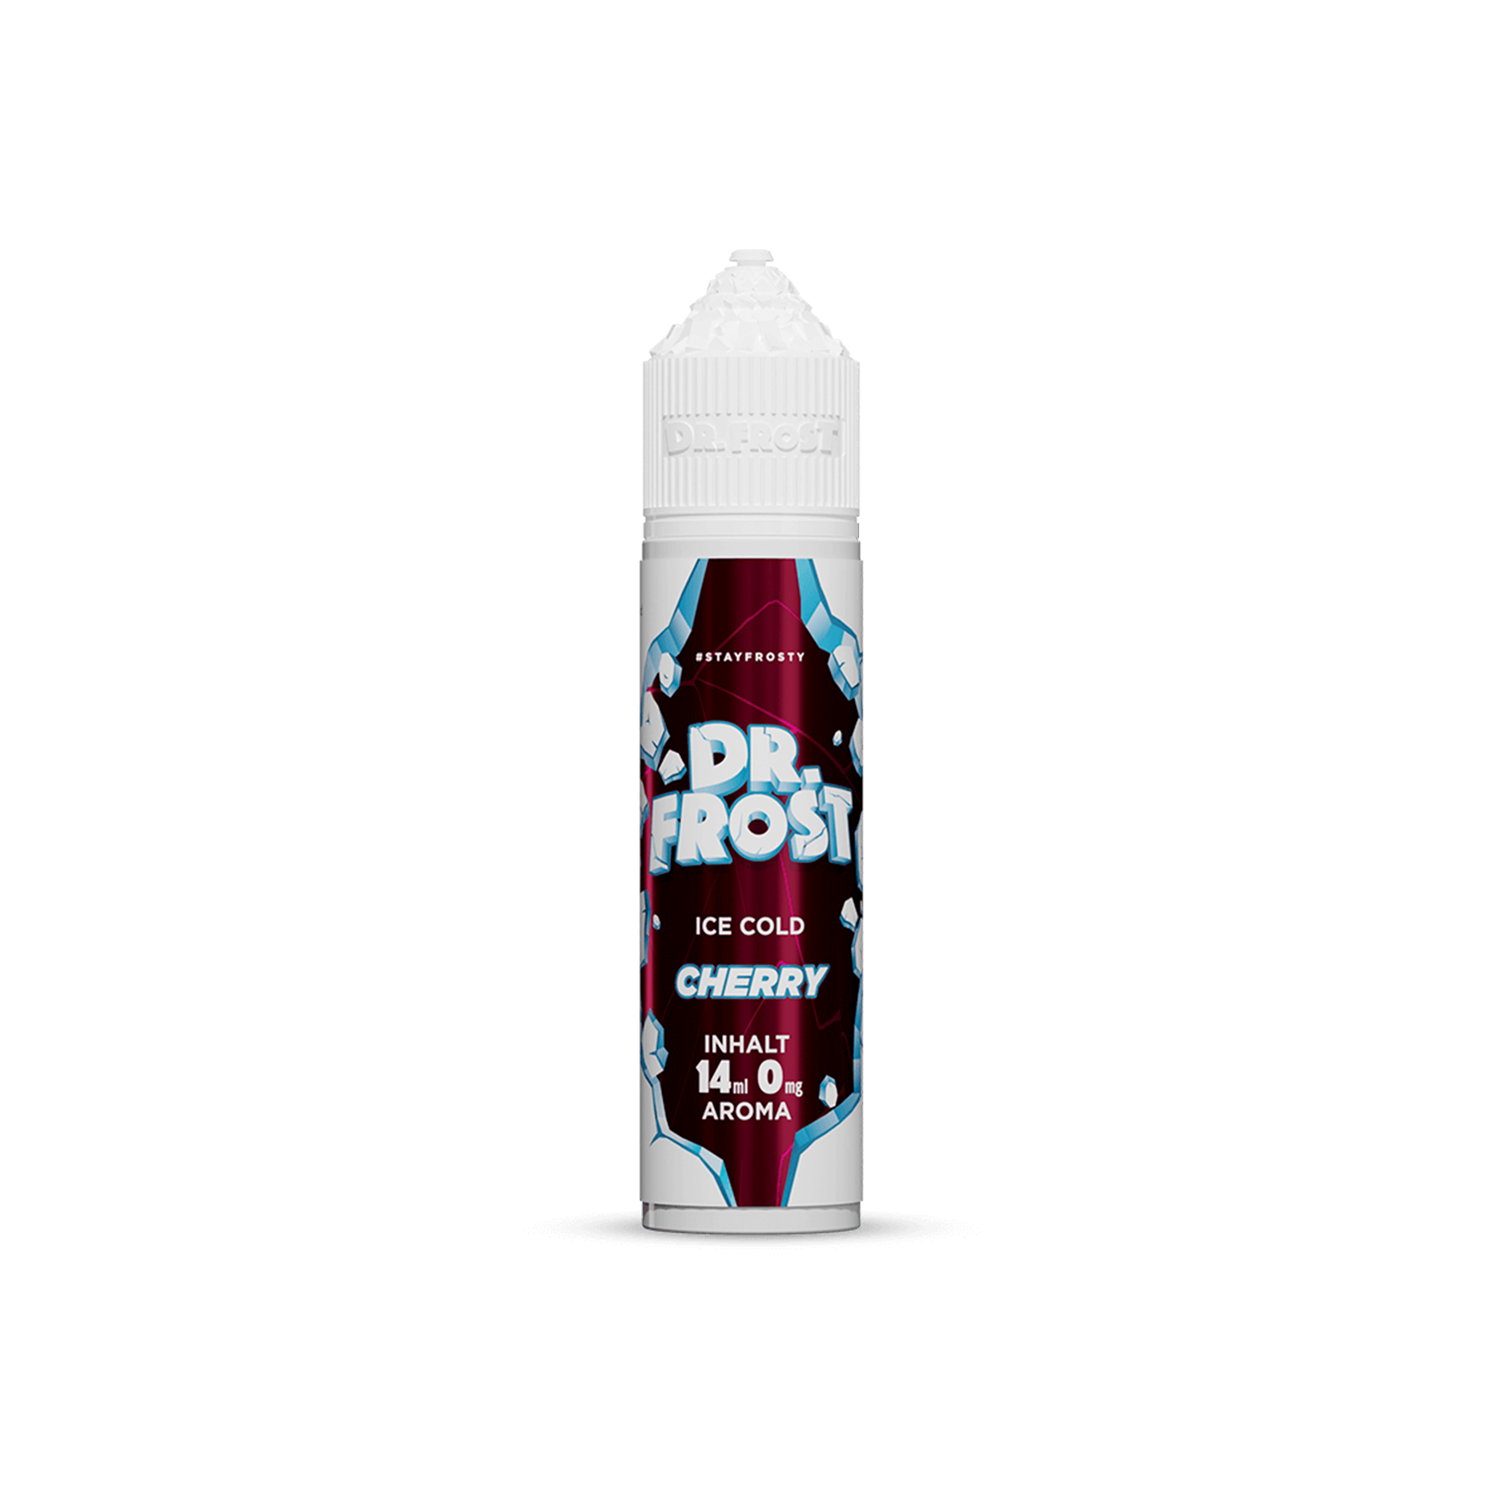 Dr. Frost - Ice Cold - Cherry 14 ml Aroma 